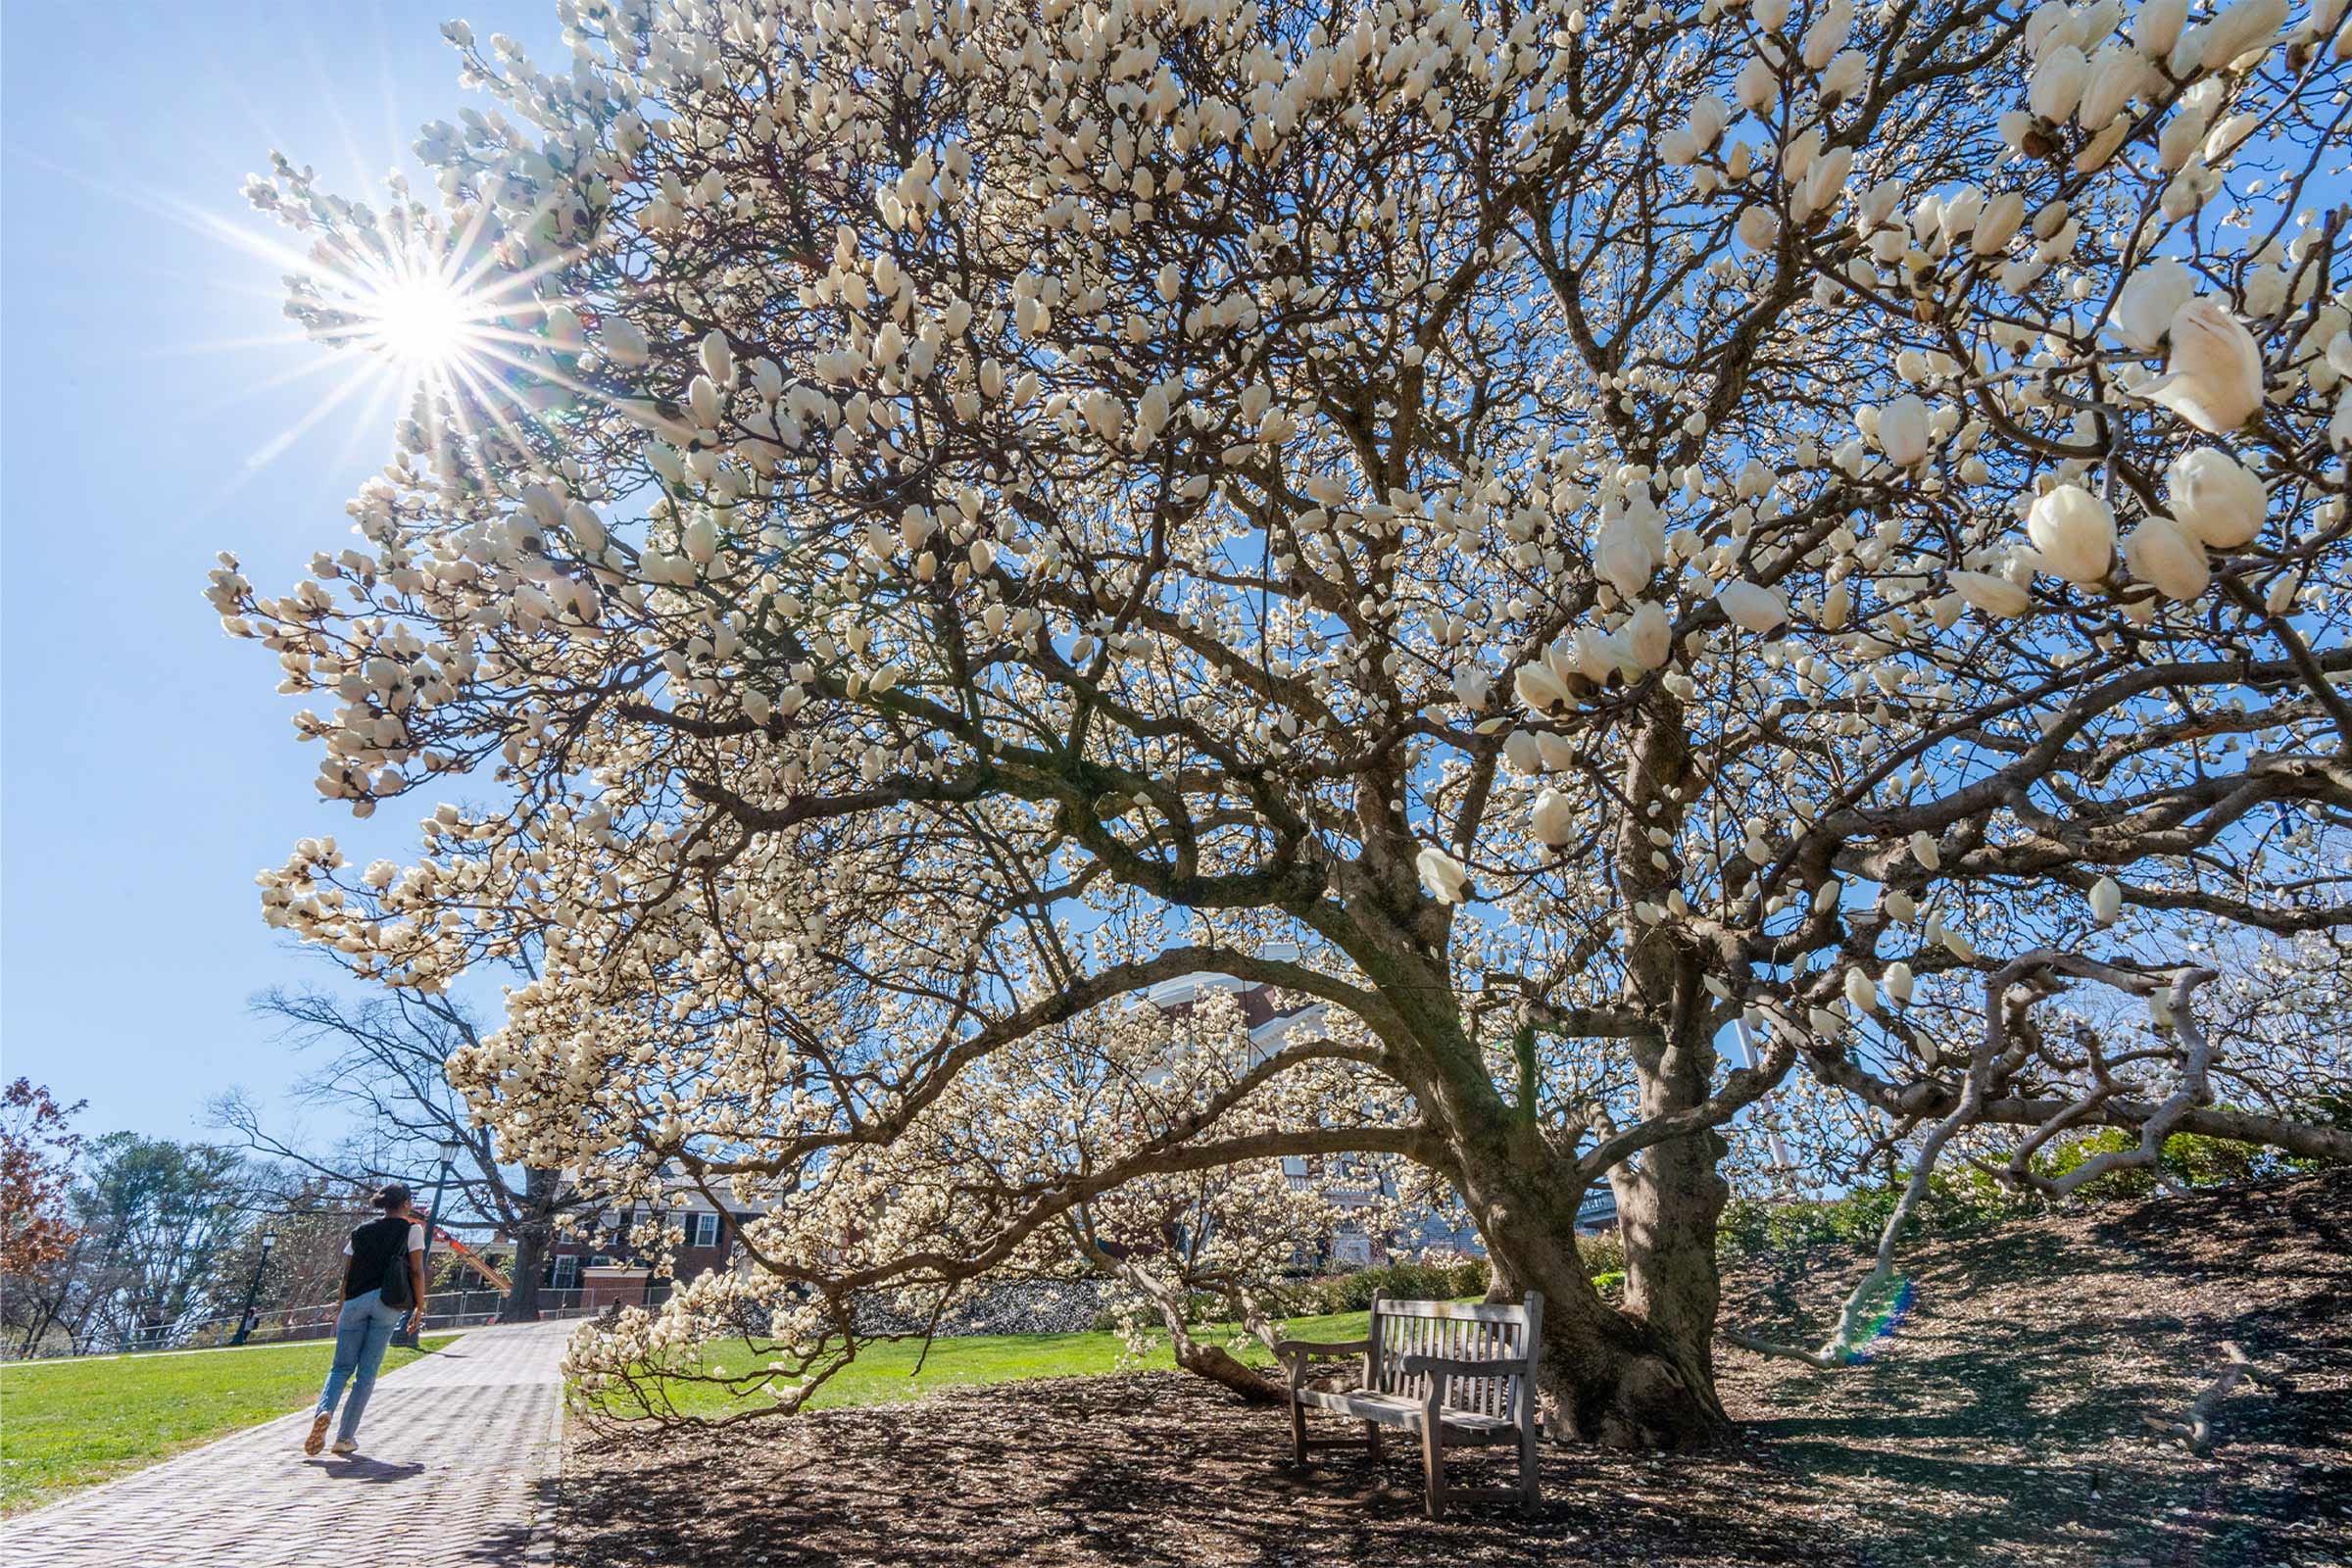 A student walking by one of the Lawn's magnolia trees in full bloom